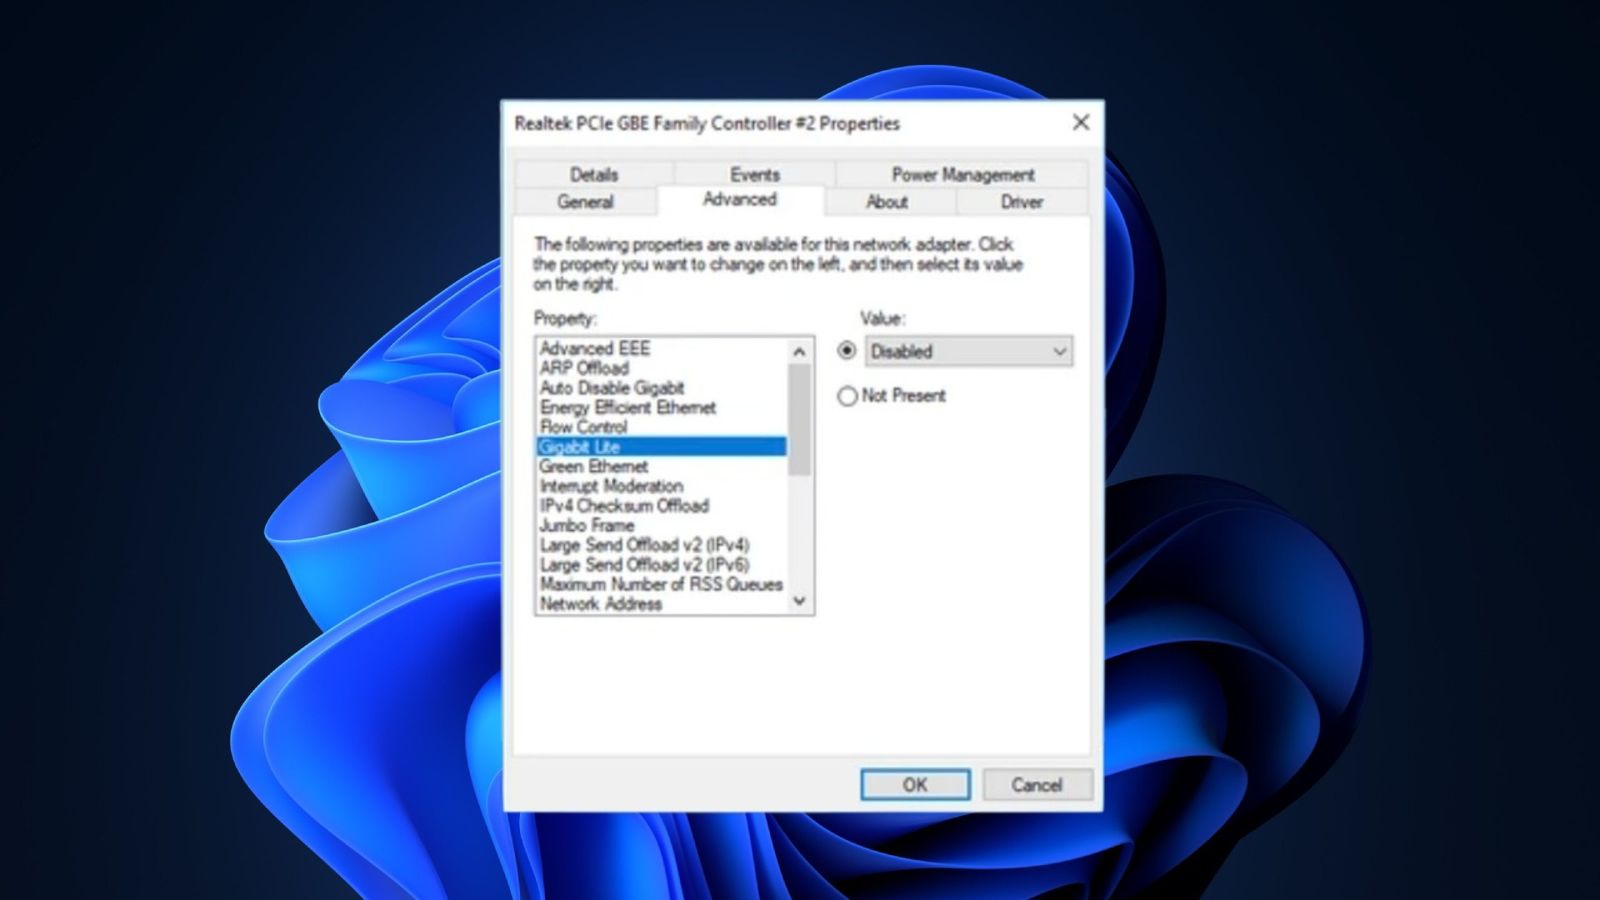 A screenshot of the Realtek PCIe GBE Family Controller properties window, showing the advanced settings tab with Gigabit Lite highlighted and set to "Disabled."